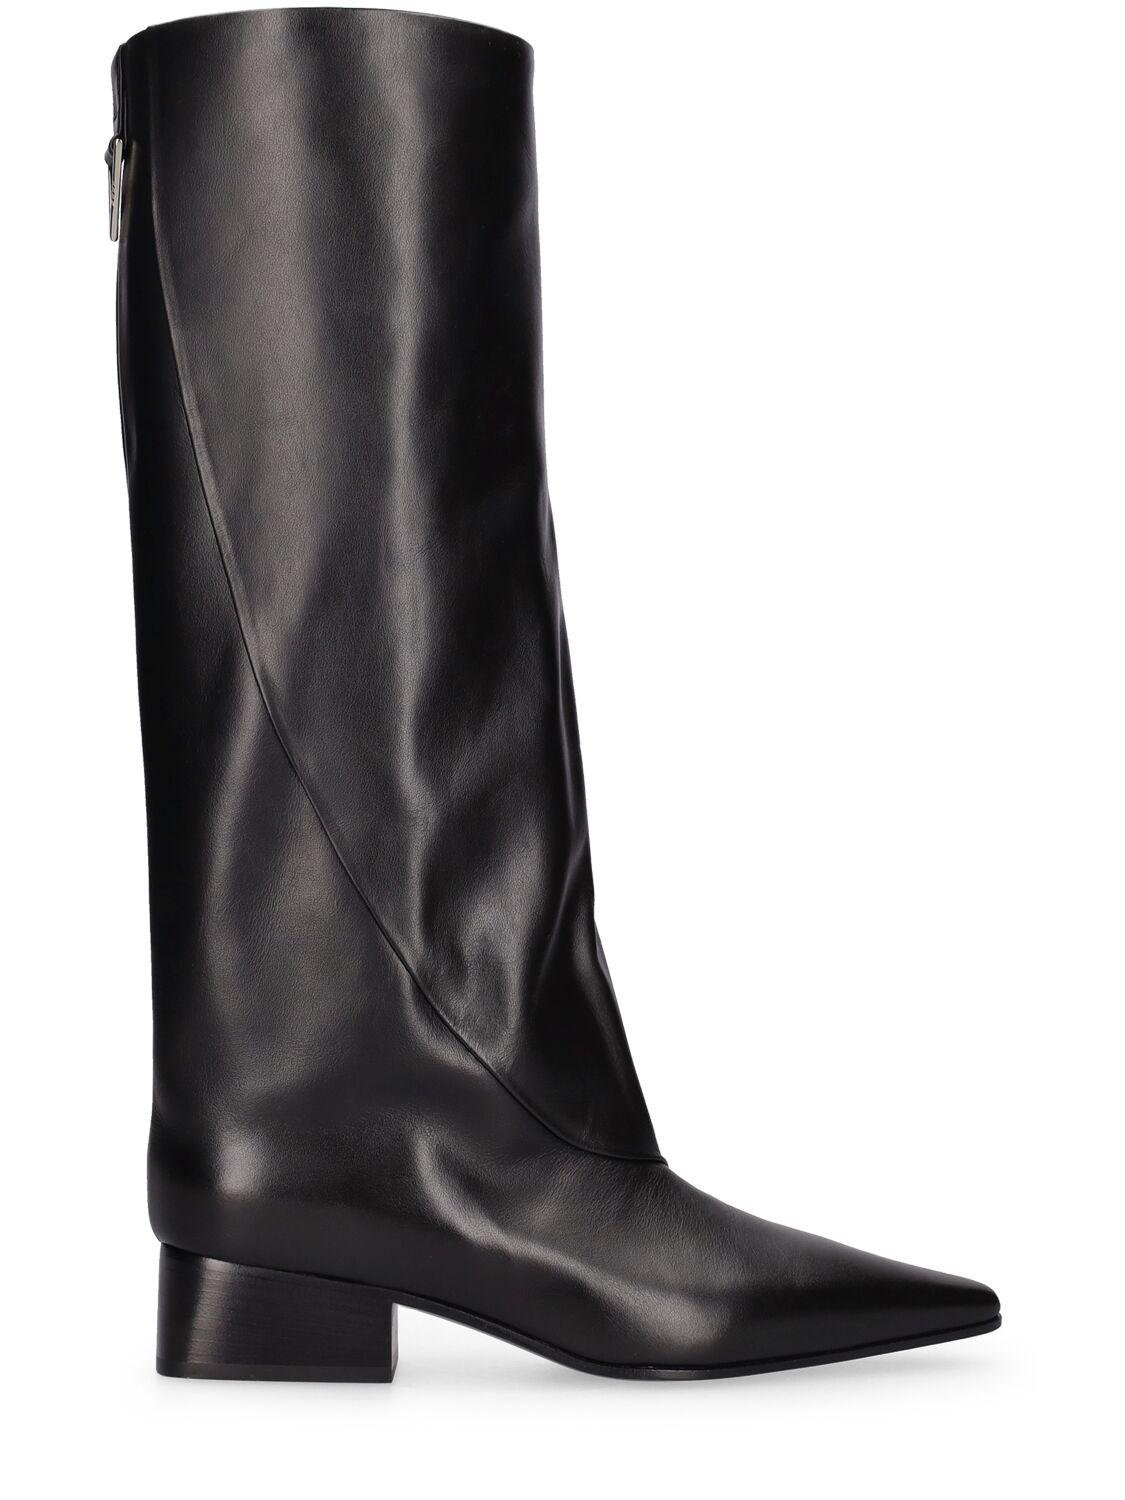 45mm Ibiza Leather Tall Boots by THE ATTICO